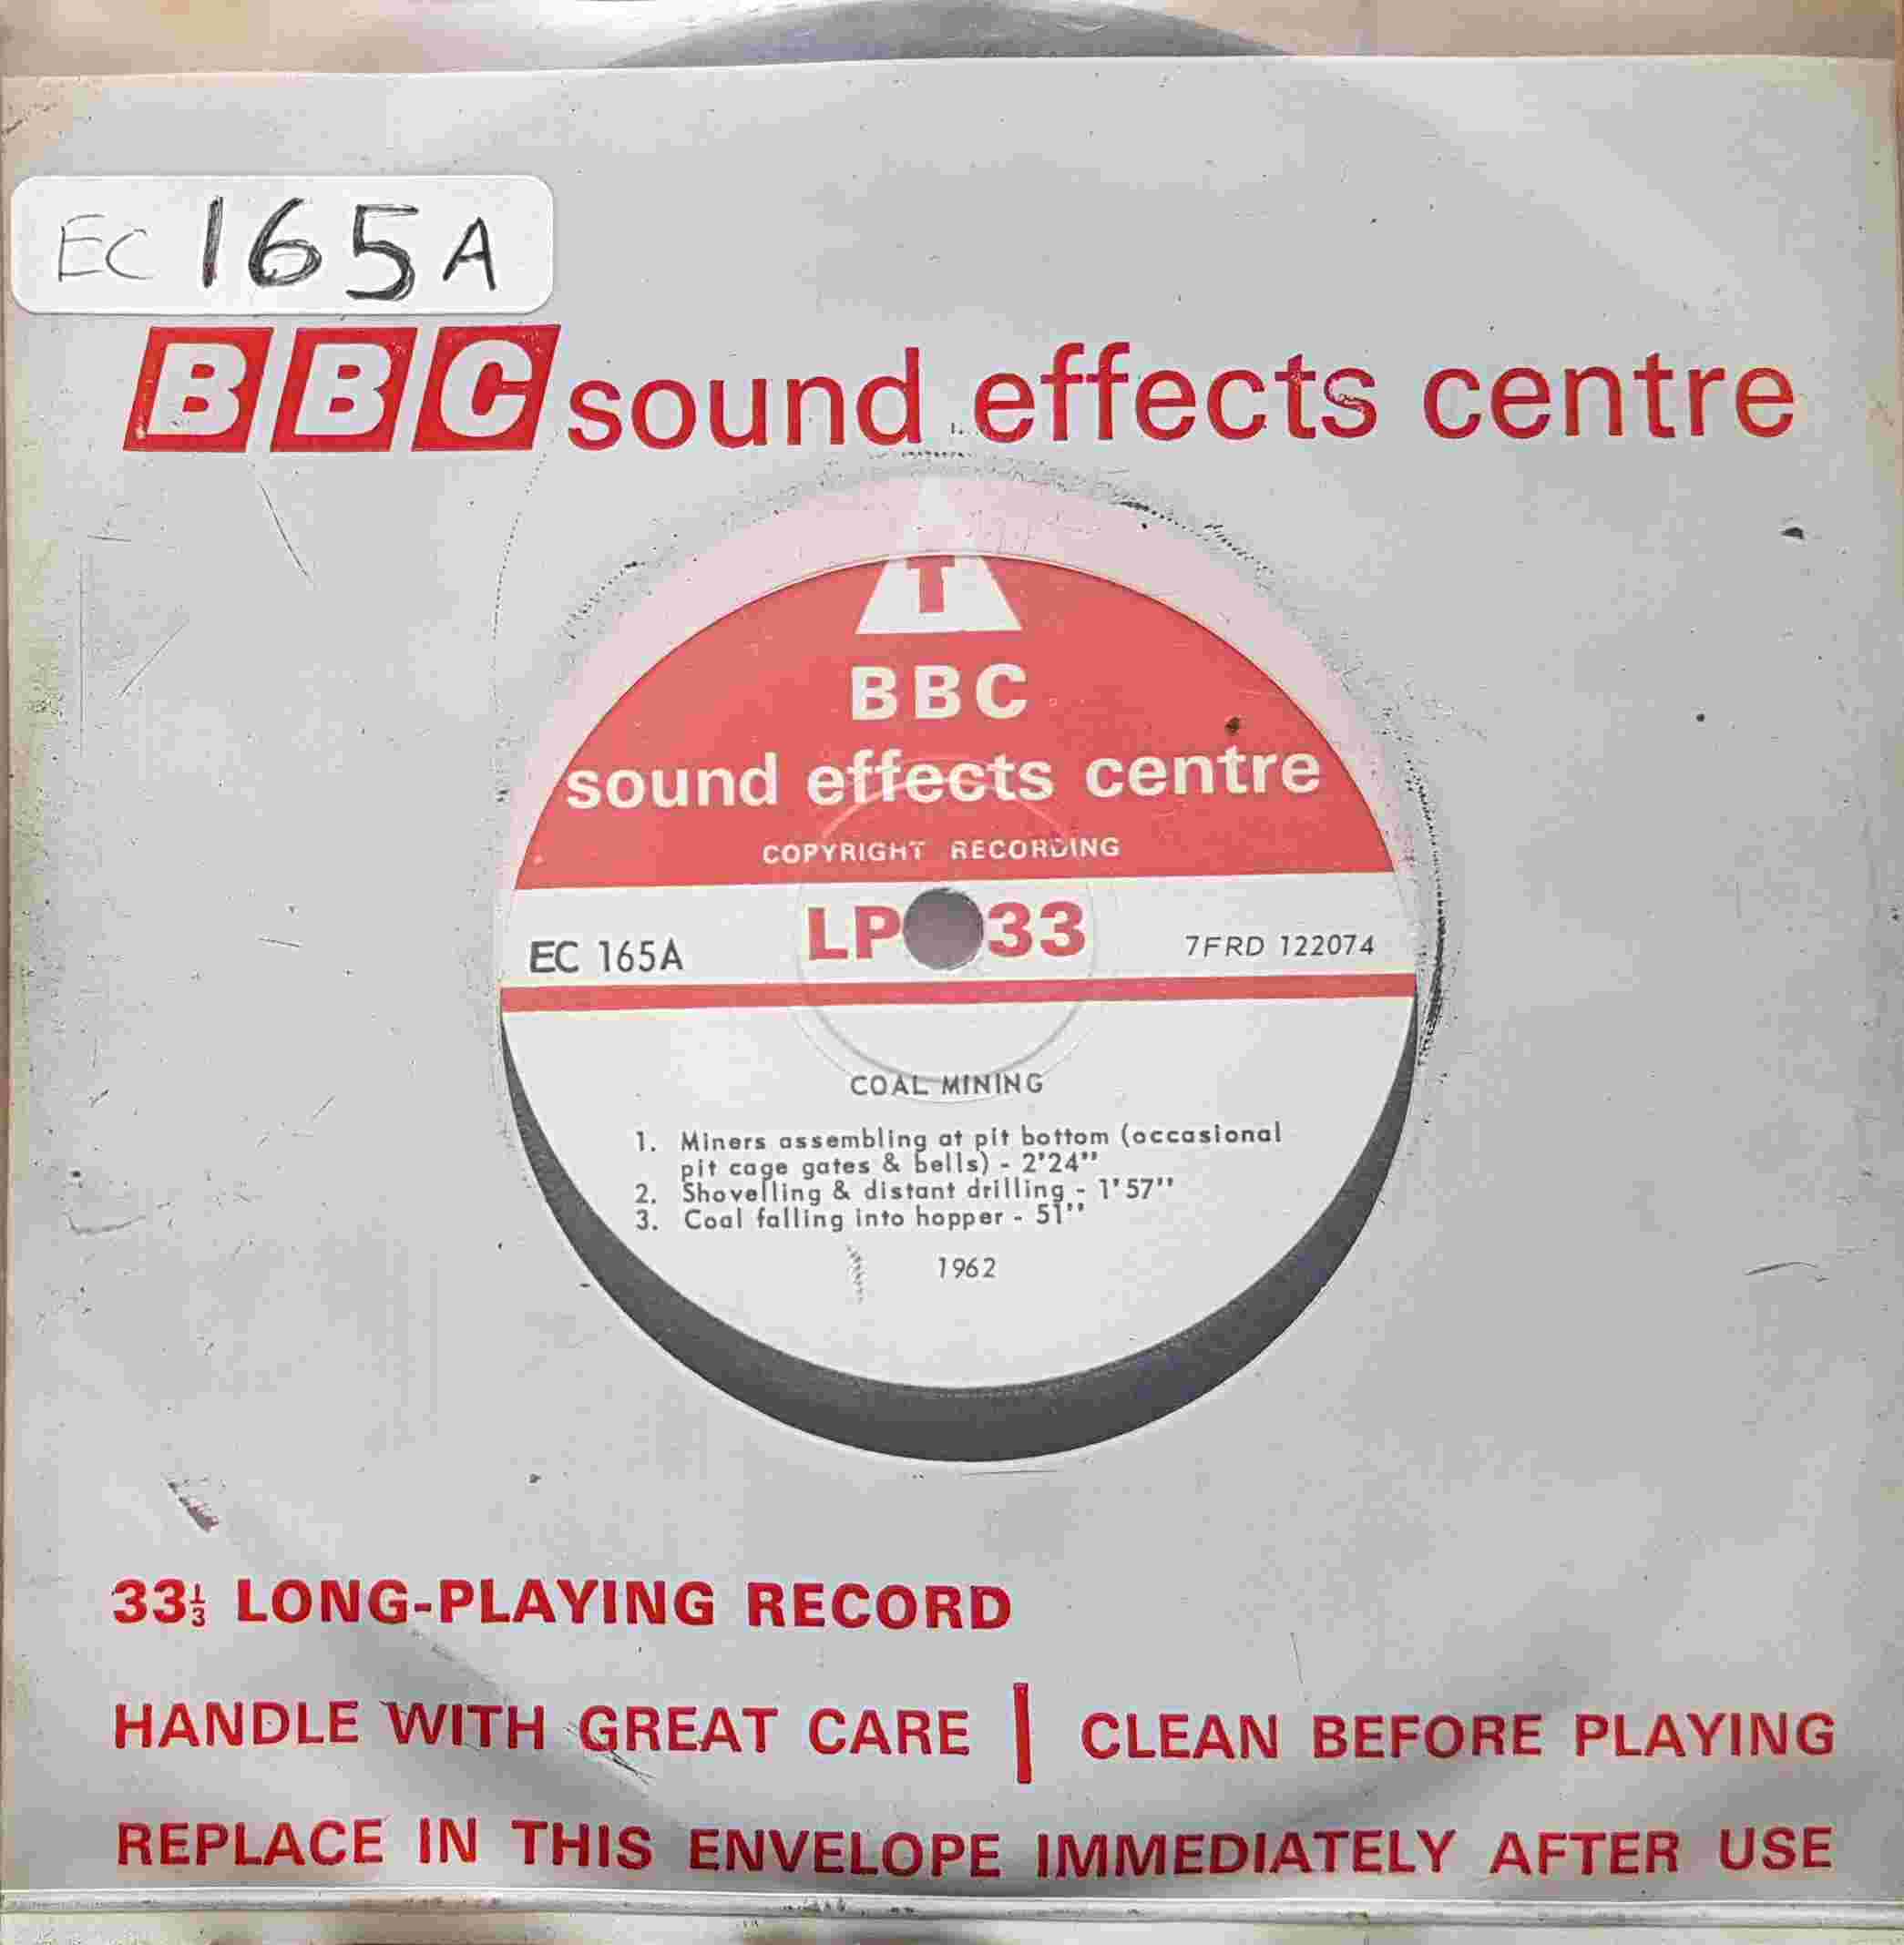 Picture of EC 165A Coal mining by artist Not registered from the BBC singles - Records and Tapes library